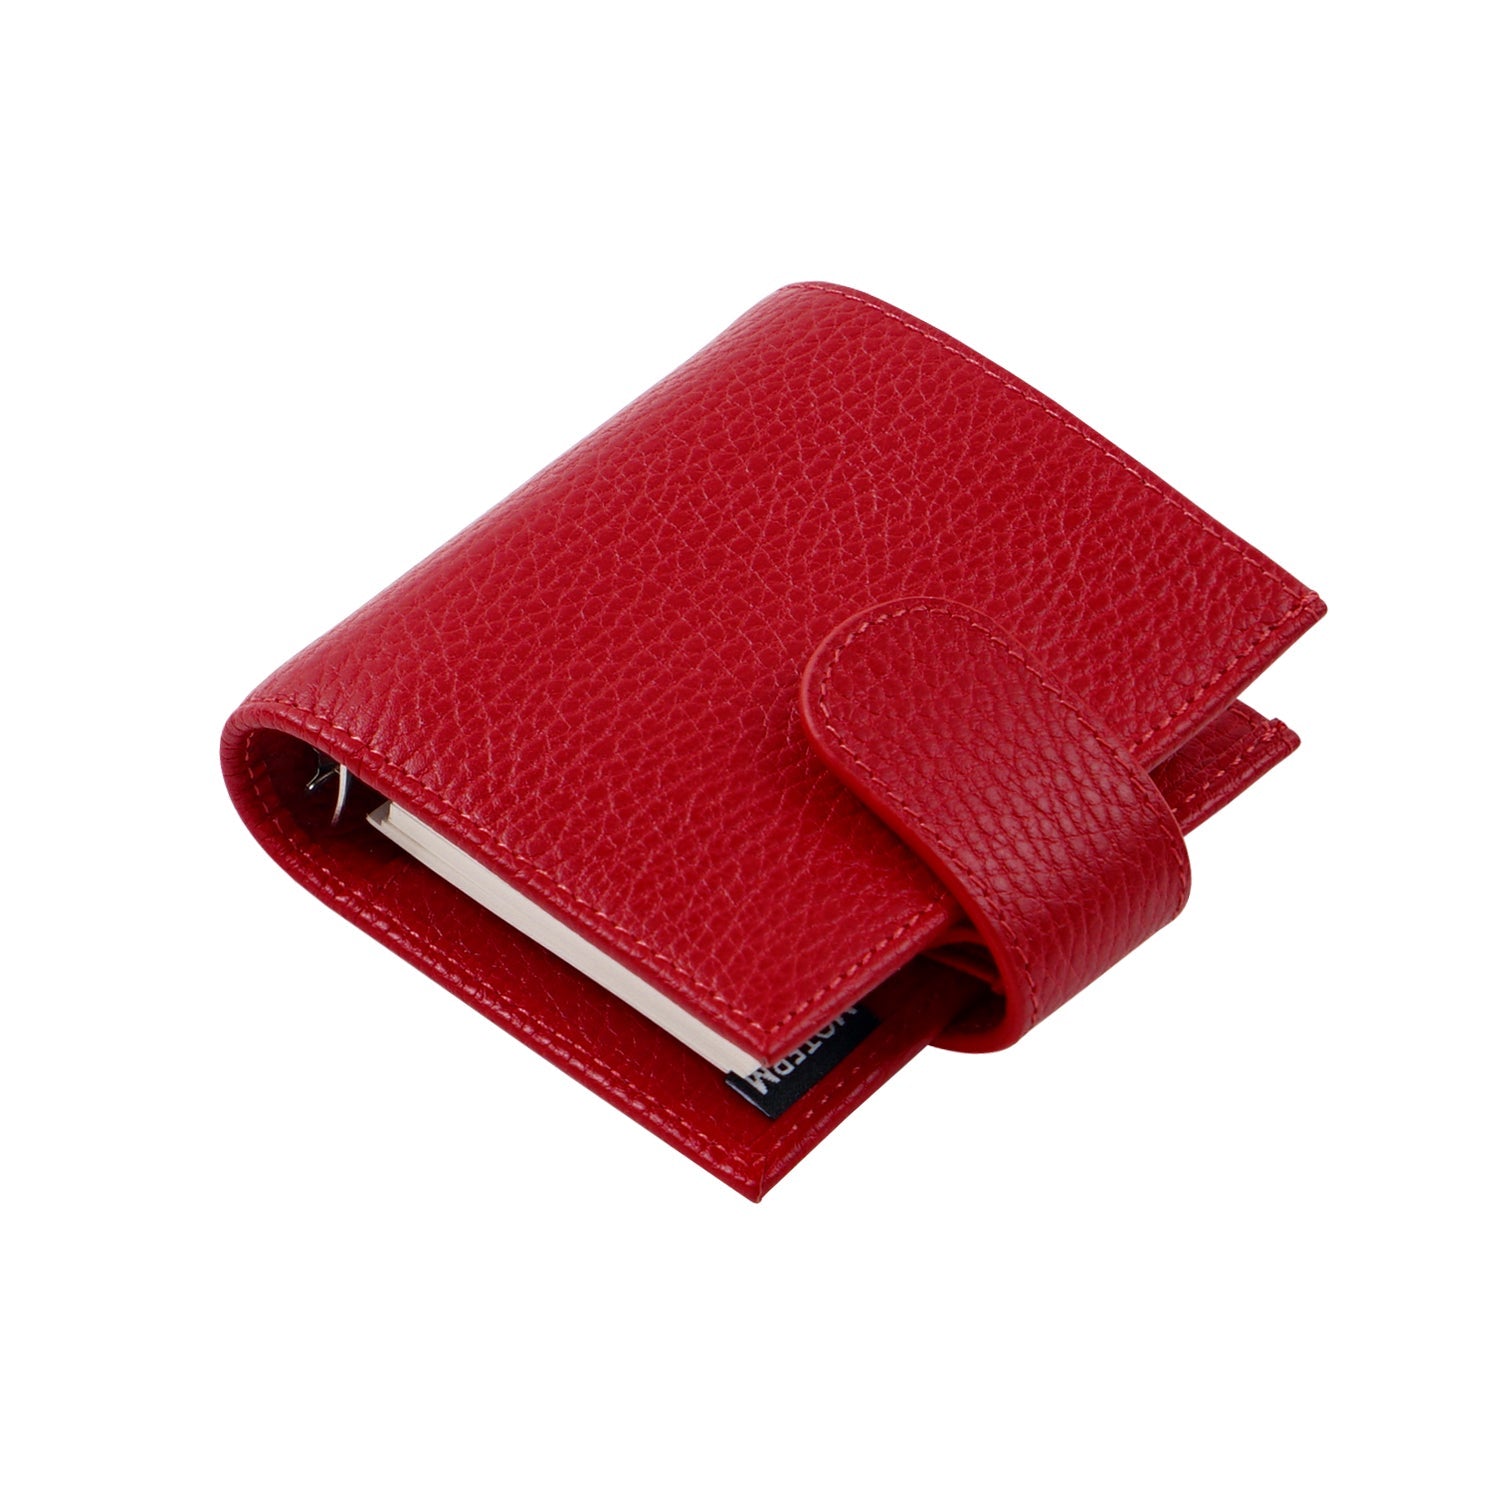 Moterm Firm Pebbled Grain Leather - Cherry Red Color